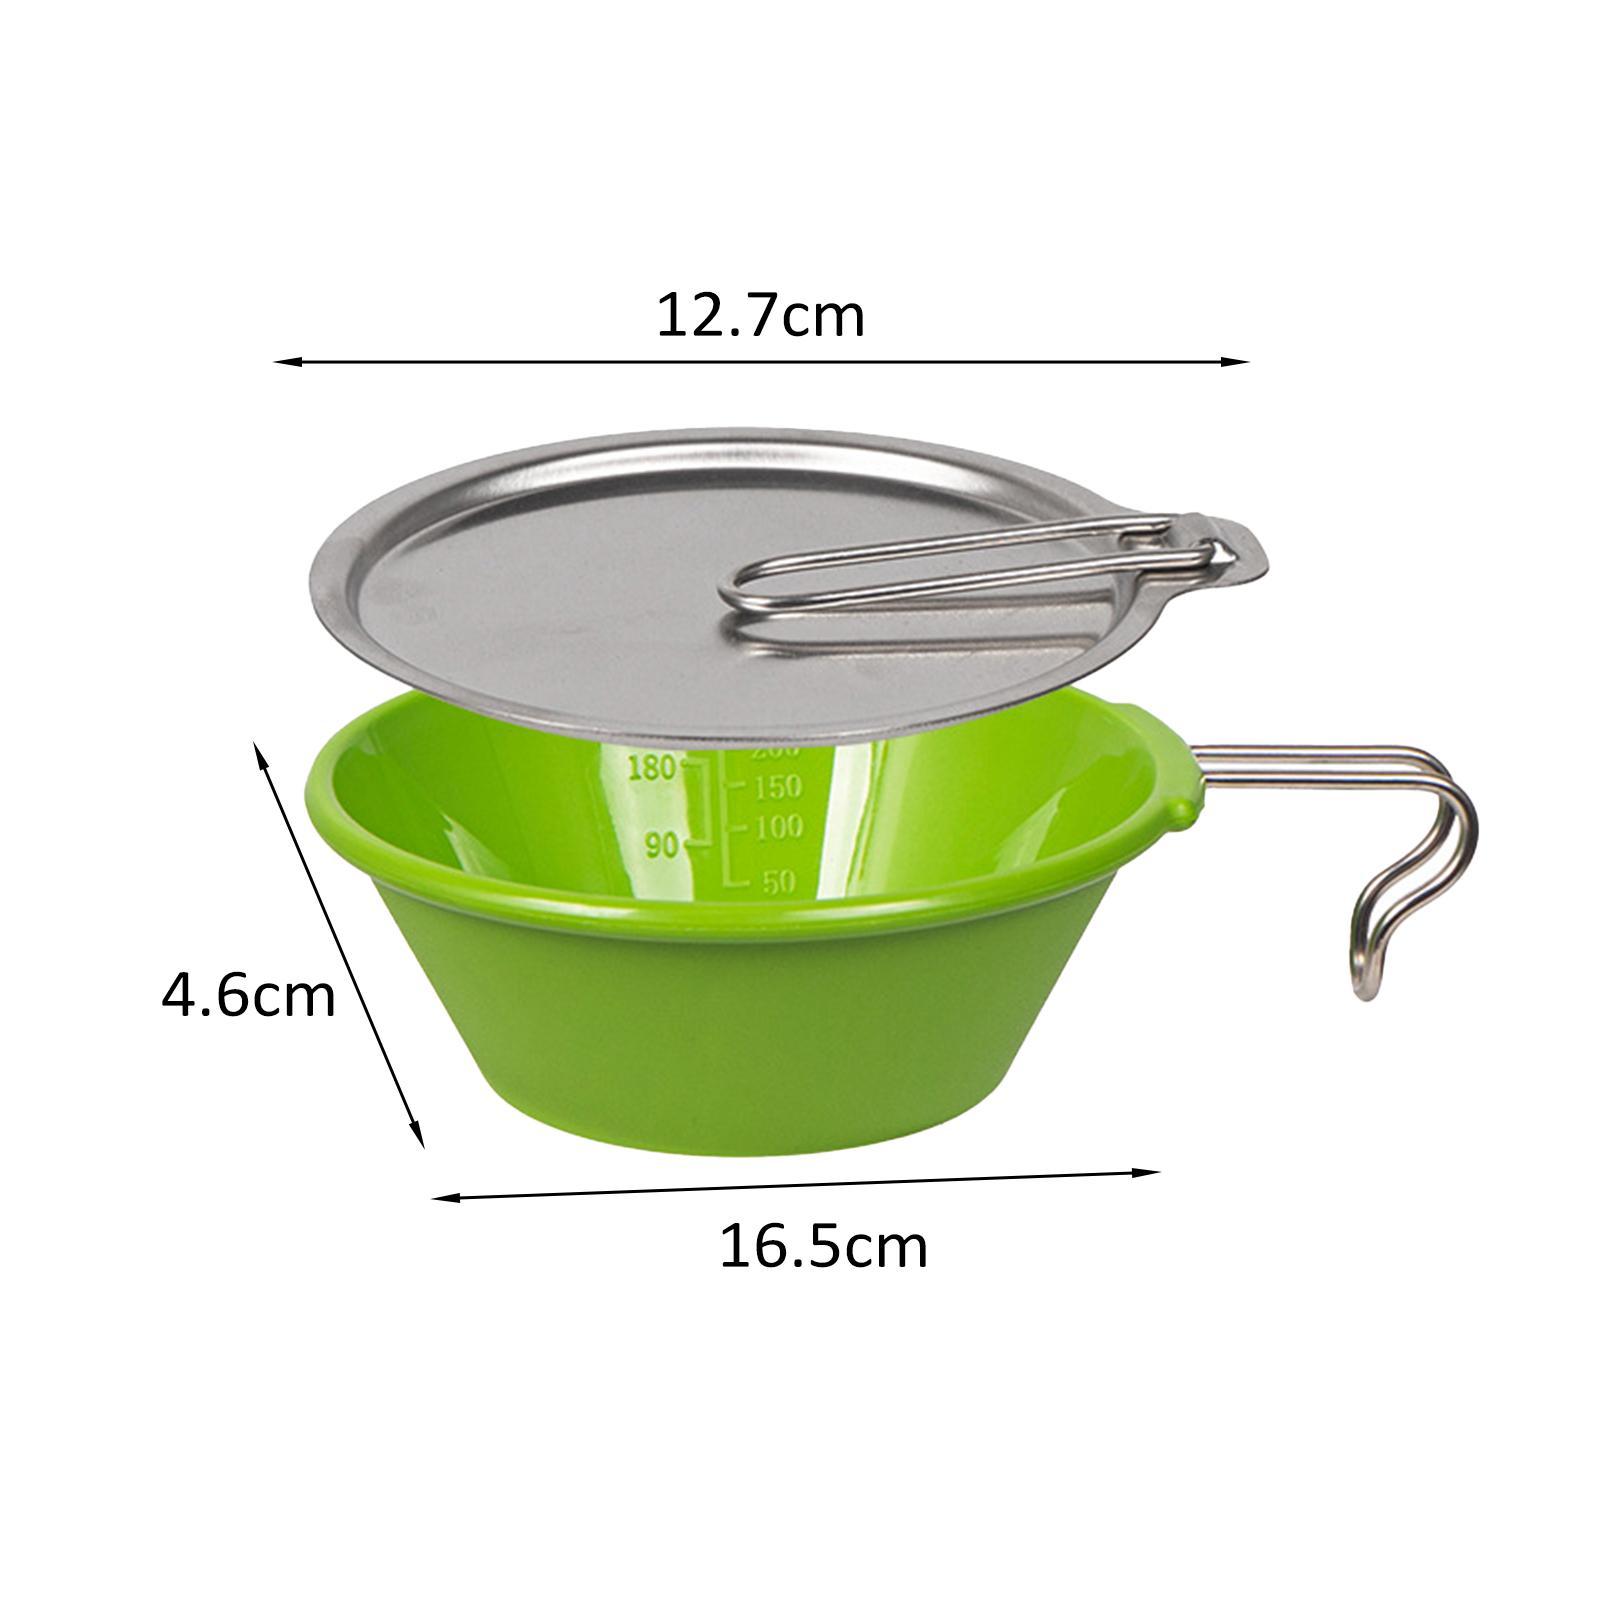 Camping Bowl with Stainless Steel Handle Salad Bowl PBT Bowl Lightweight Soup Bowl Food Bowl Outdoor Dinnerware for Travel Hiking Picnic BBQ